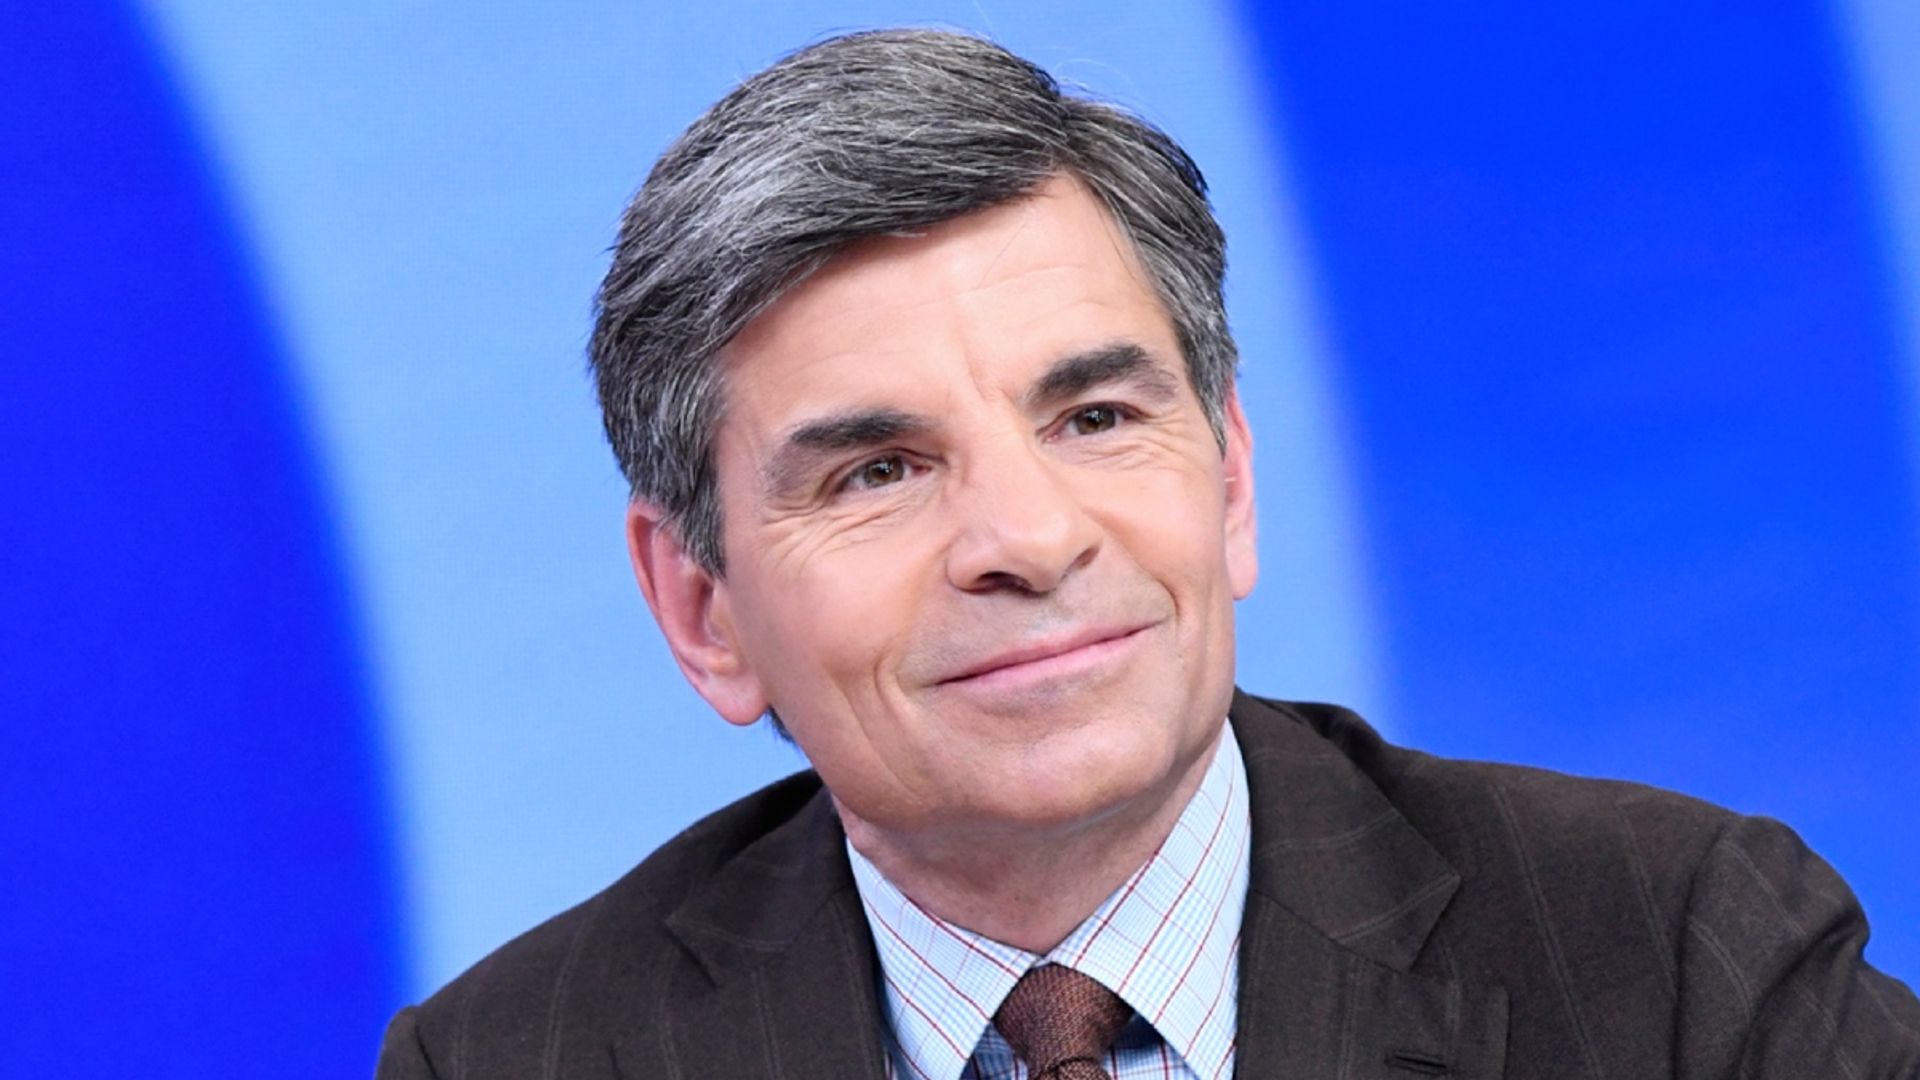 george-stephanopoulos-jeopardy-comment